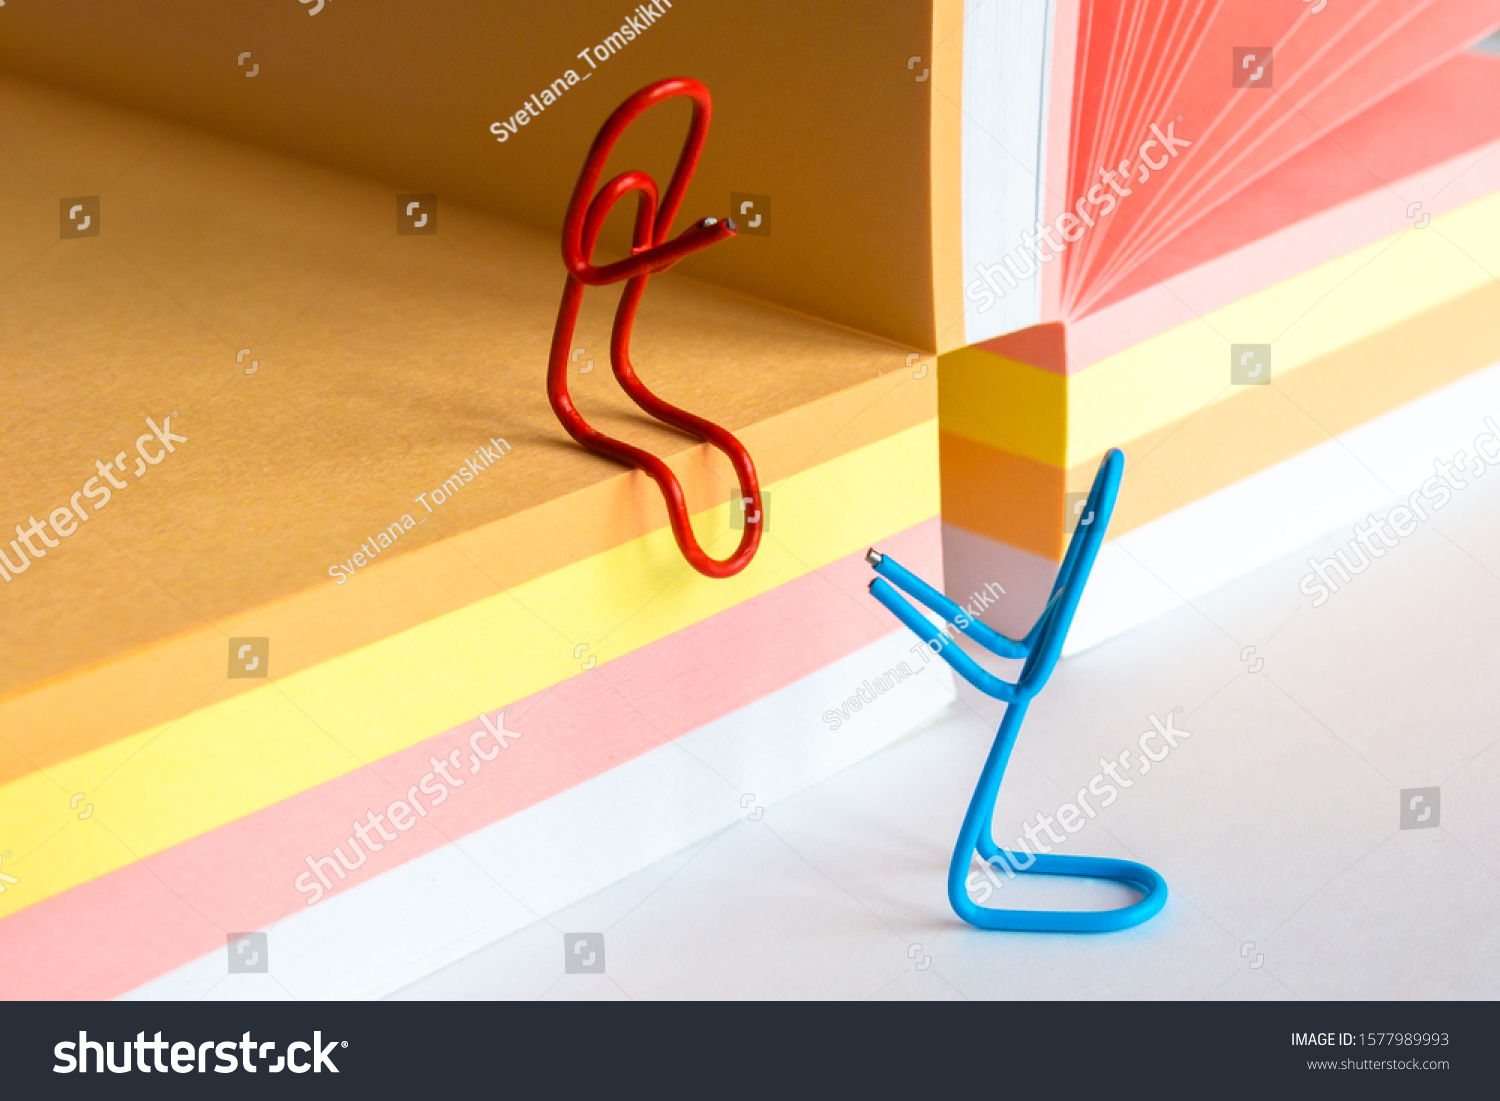 Paper Clips and Blank of Note Papers. Romantic workplace relationship concept, romance at the office concept #1577989993